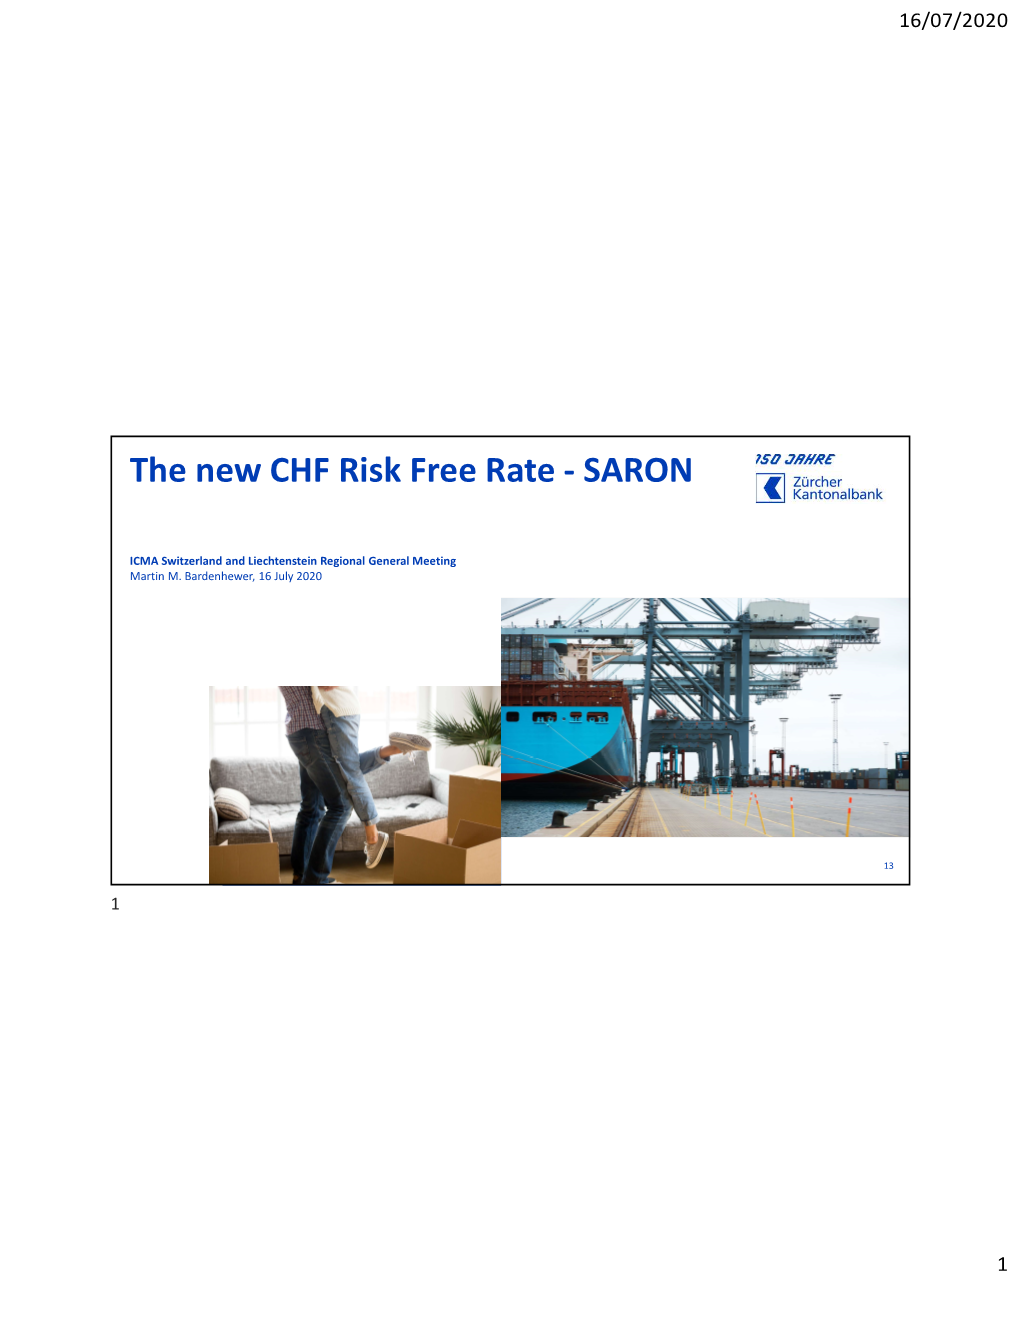 The New CHF Risk Free Rate - SARON